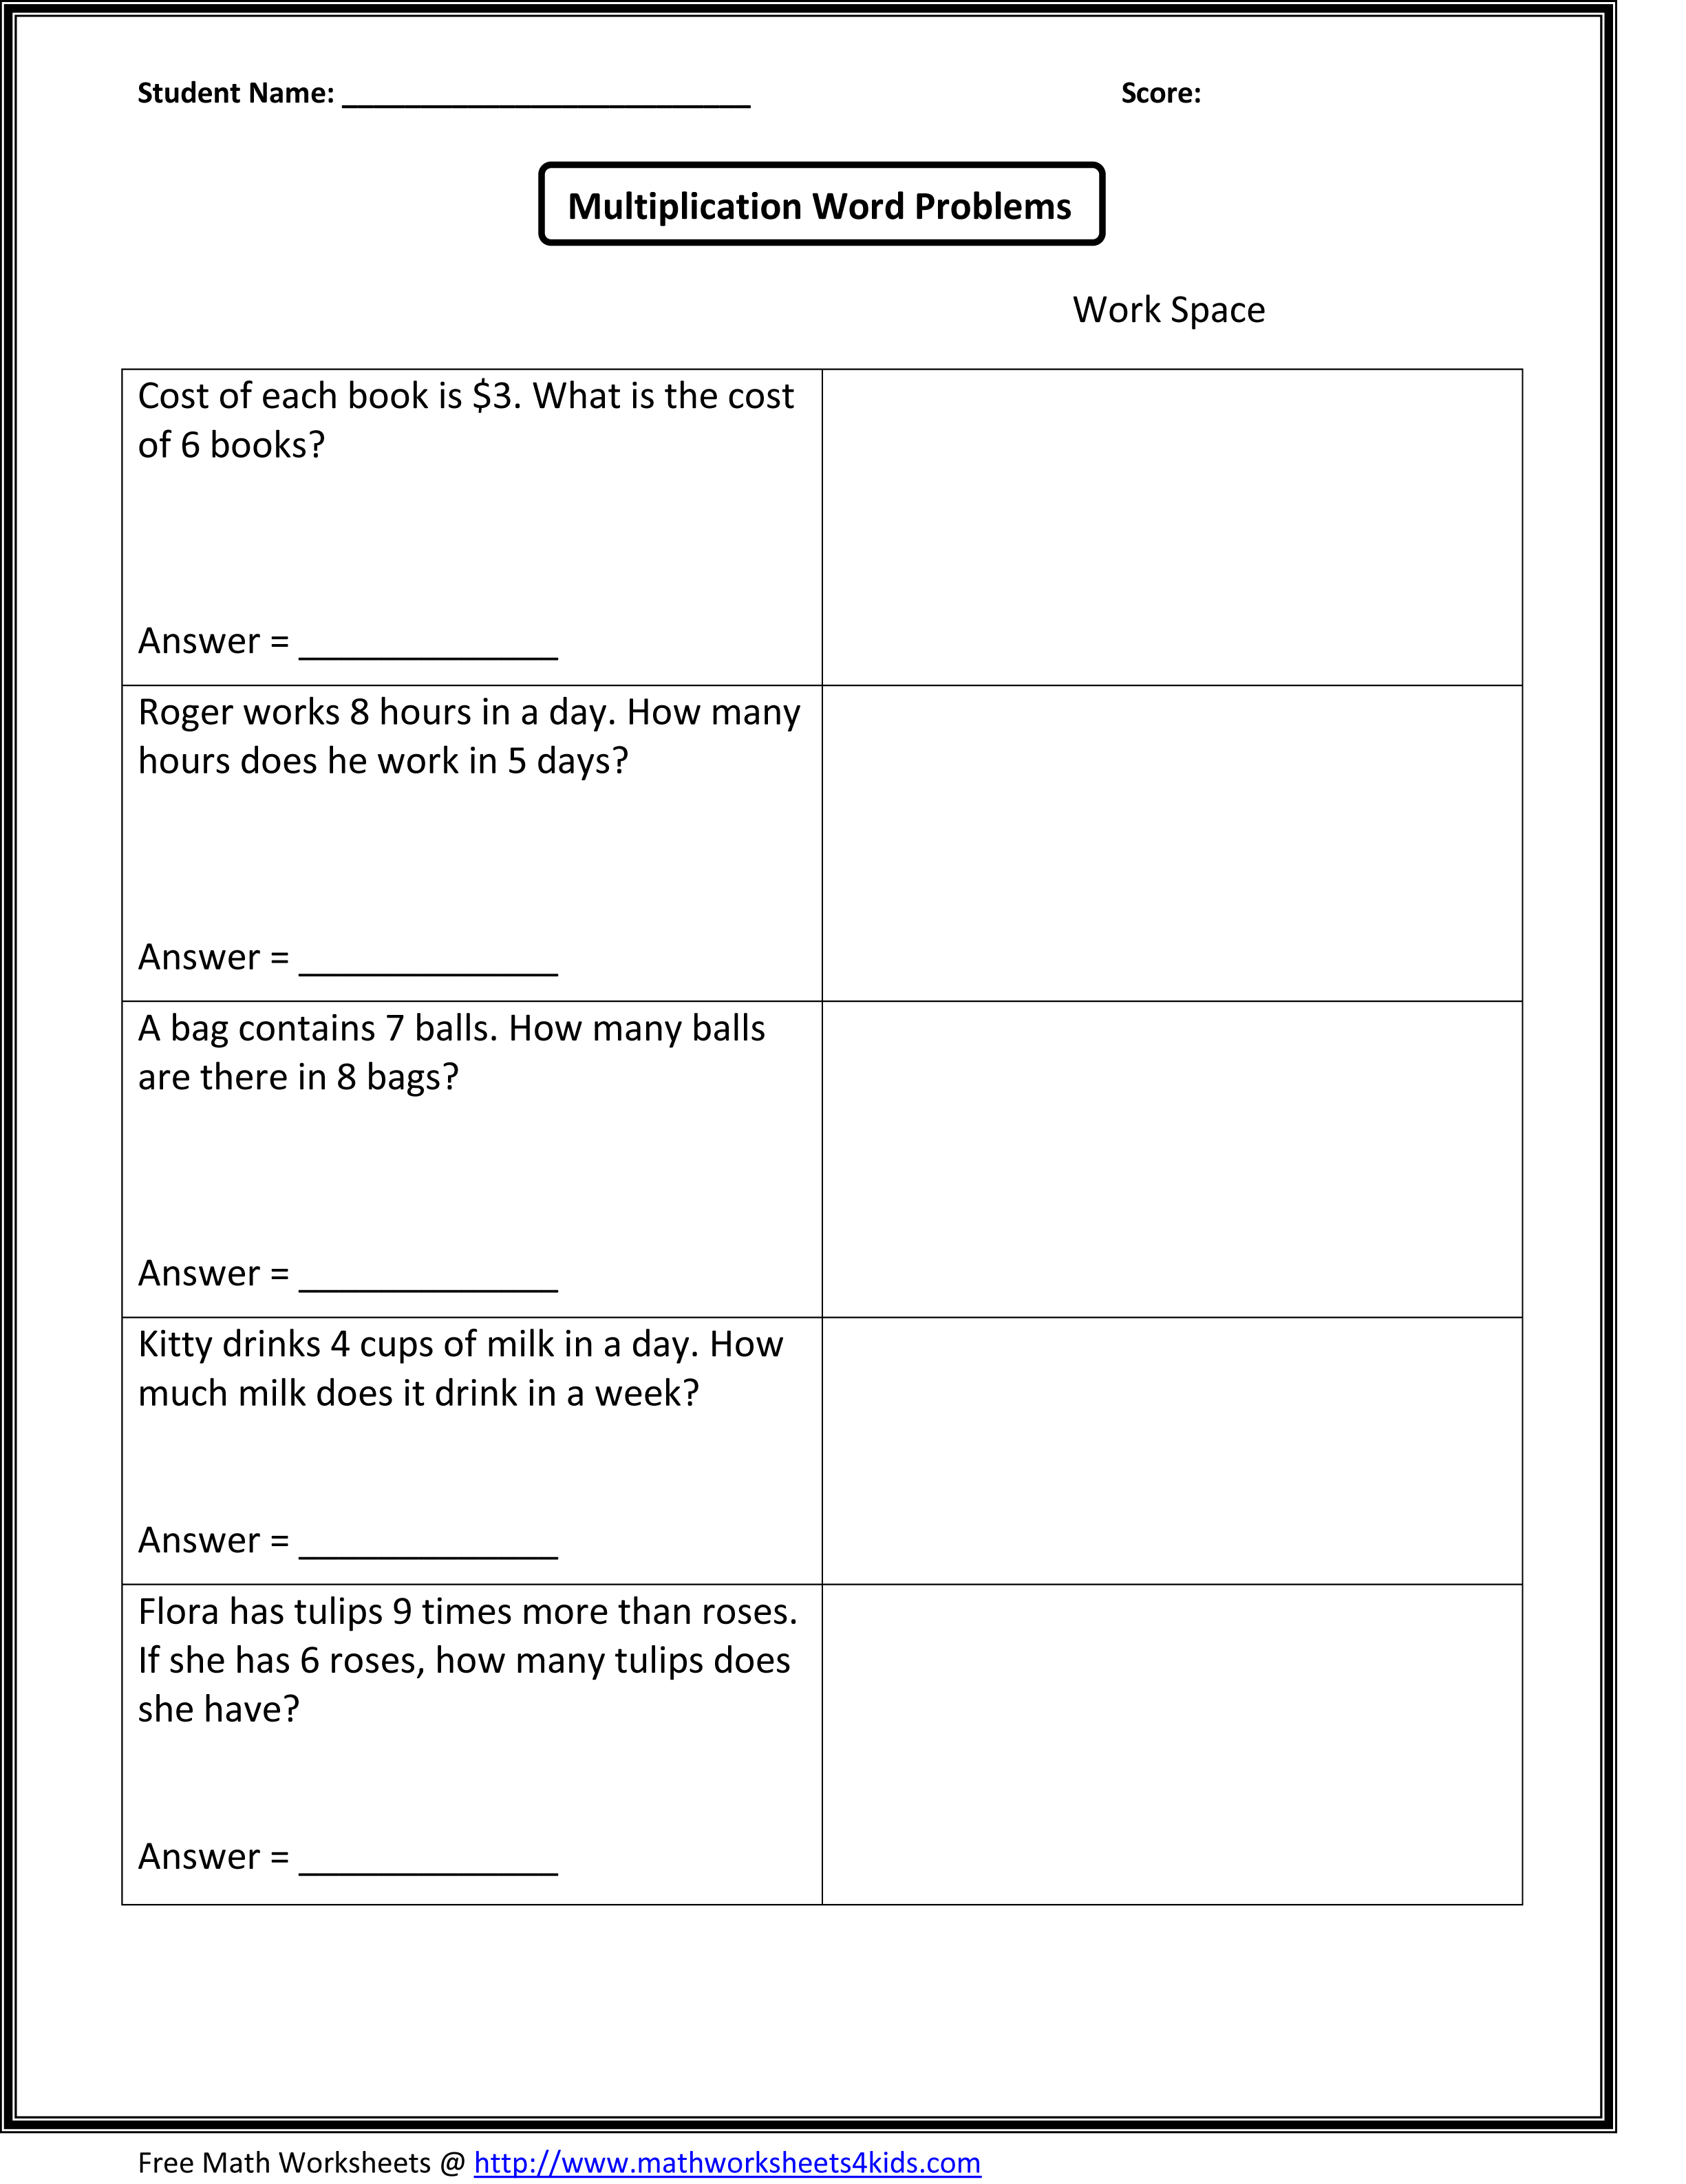 13-angles-word-problems-worksheets-worksheeto